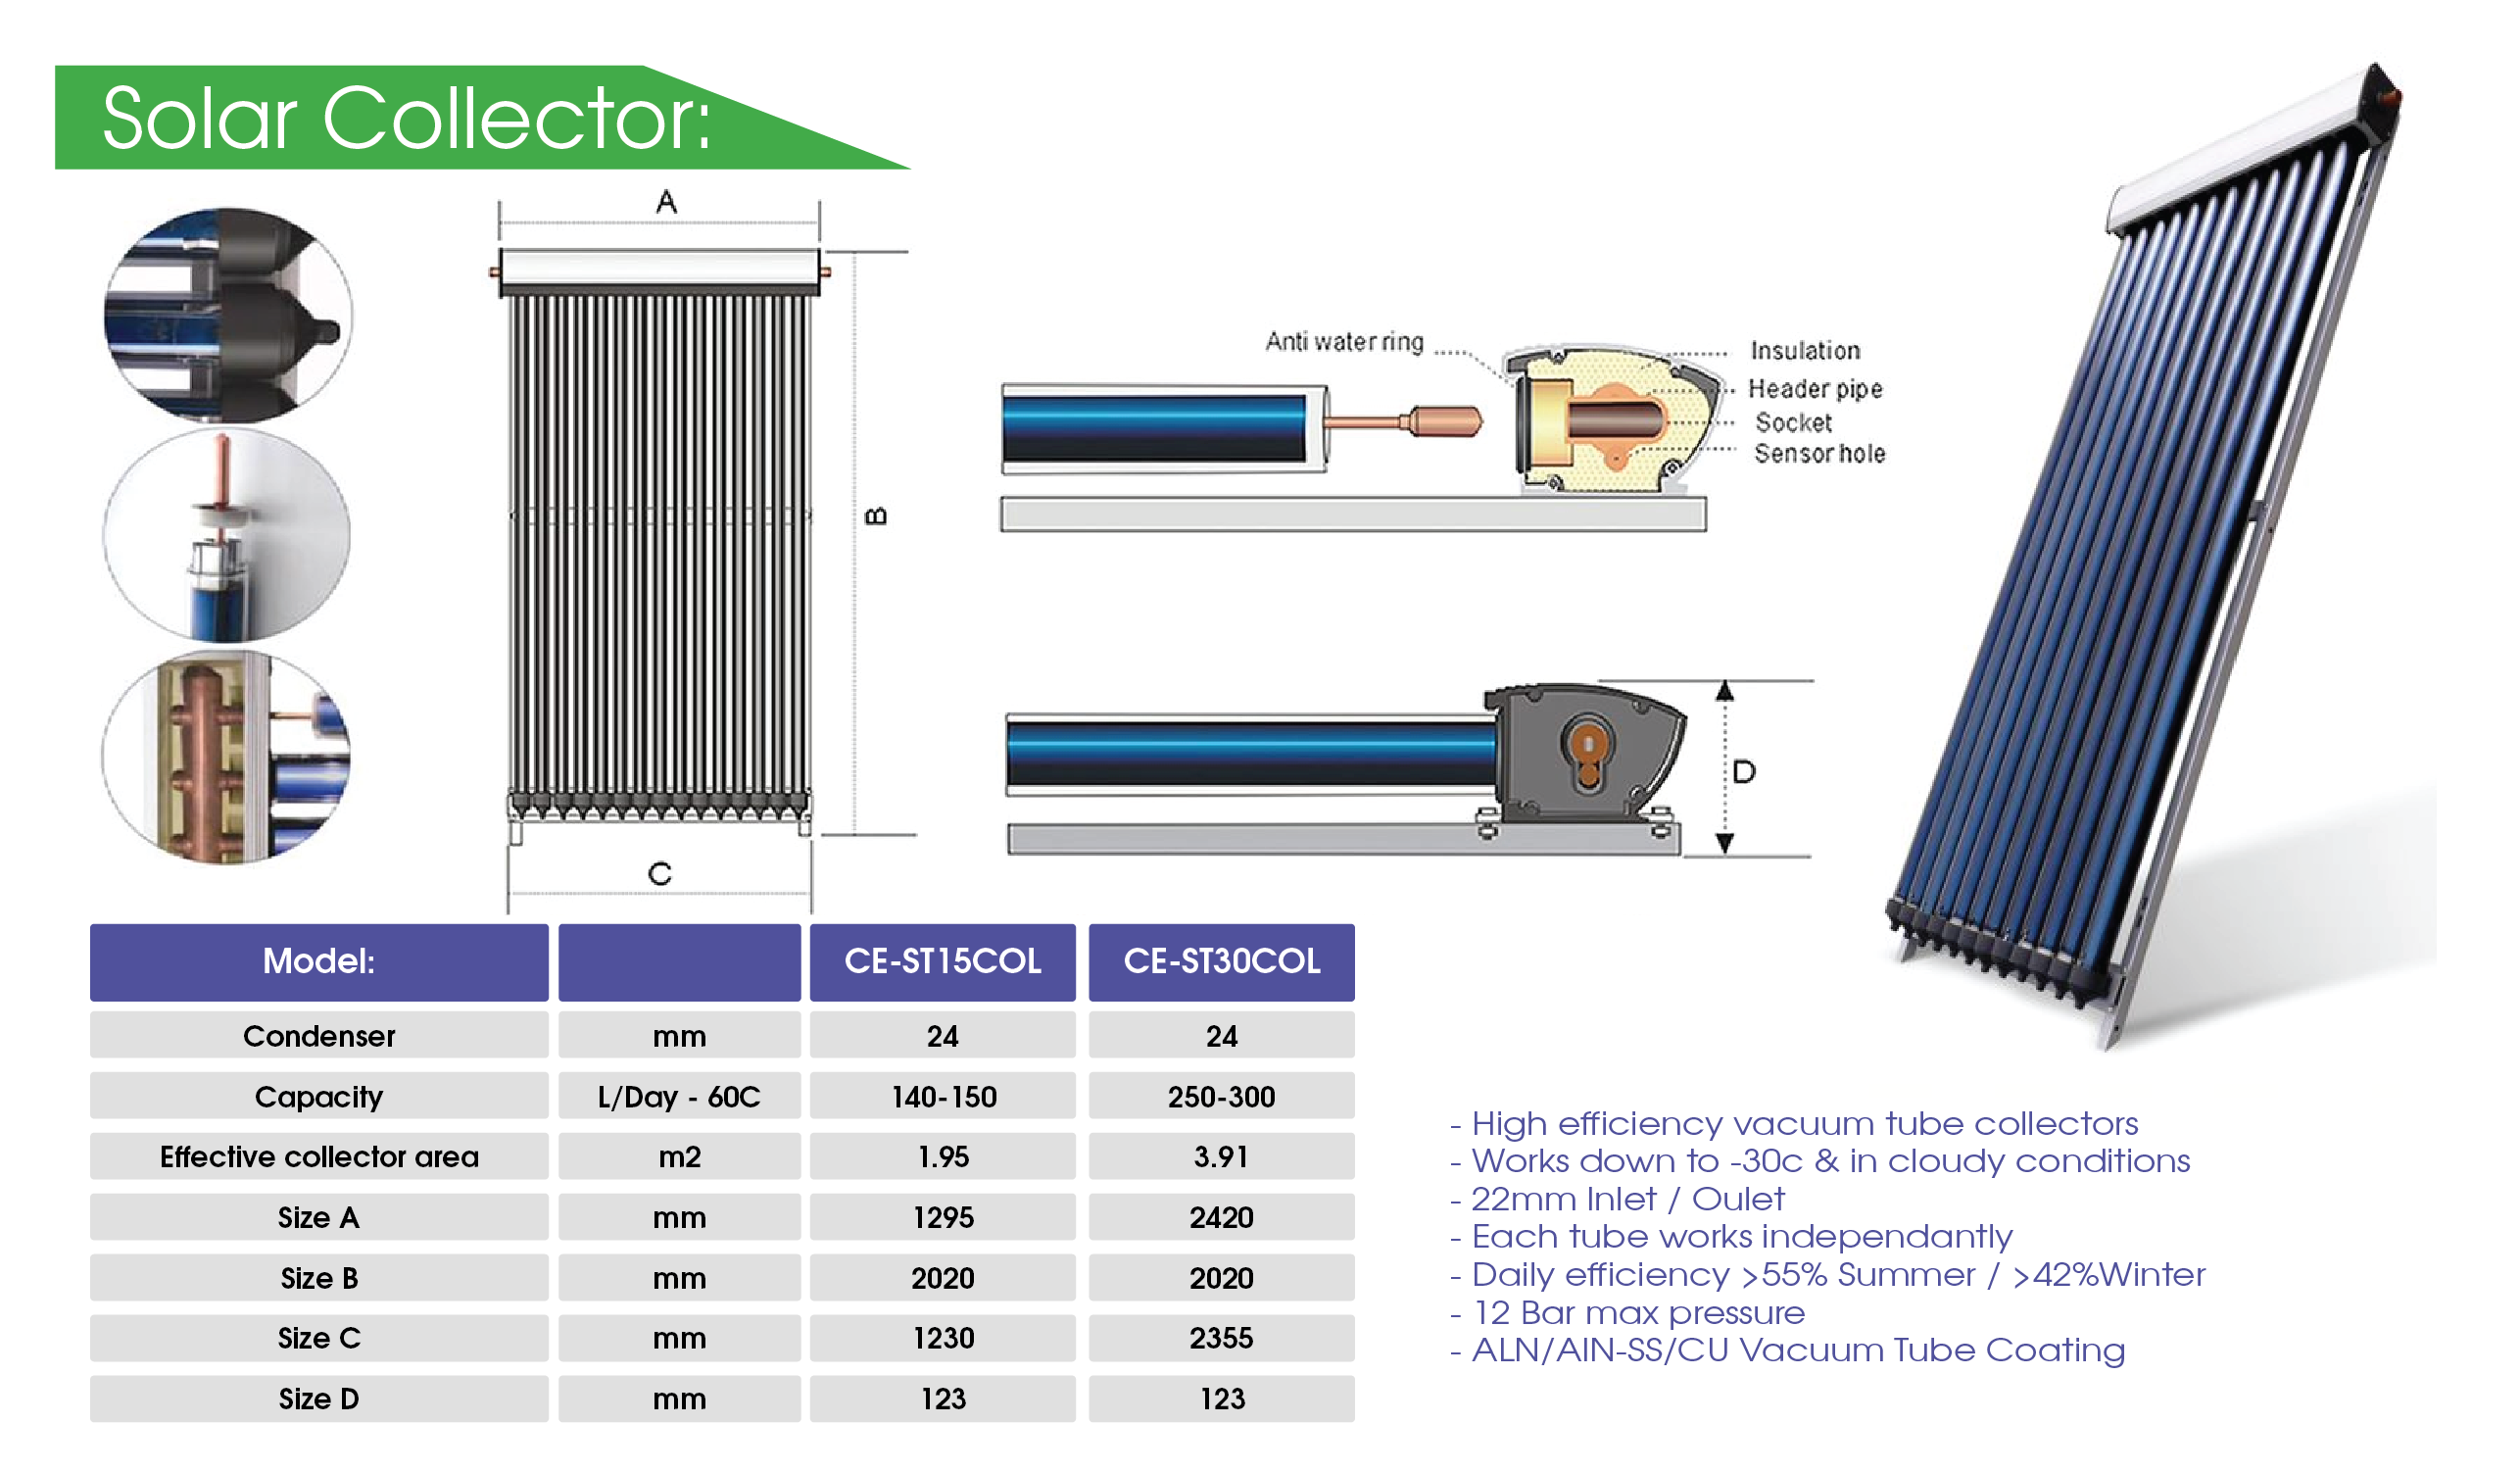 Cool Energy 30 Tube Solar Thermal Collector CE-ST30COL